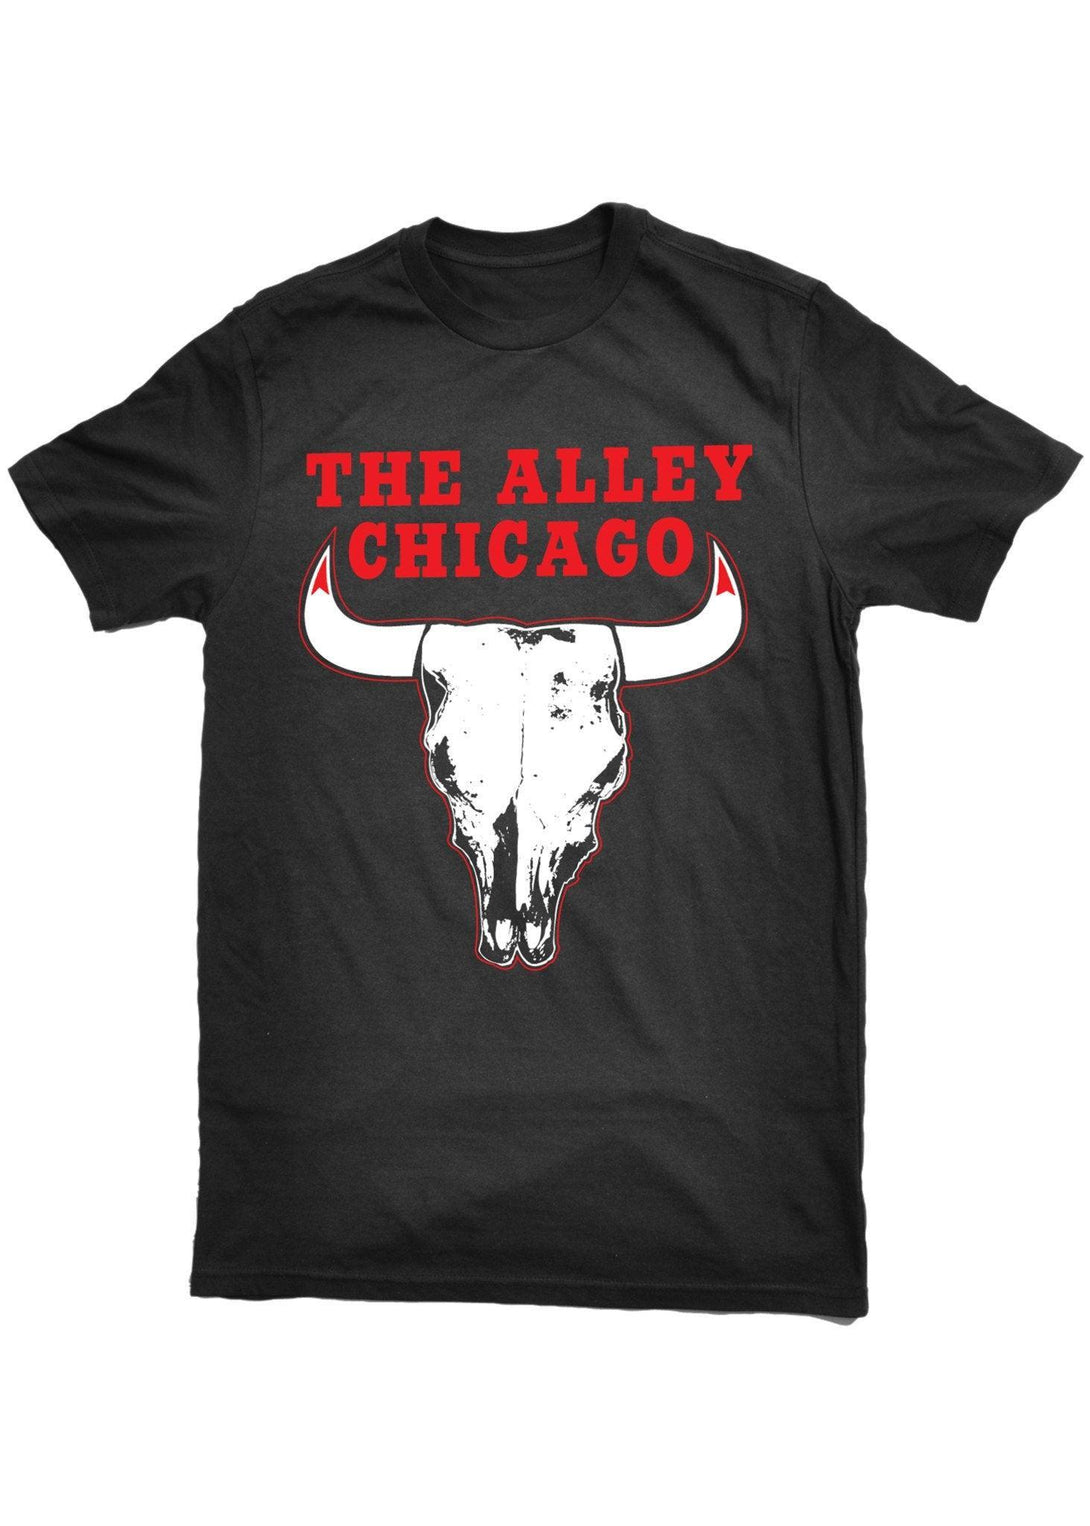 T-Shirts - The Alley Chicago Basketball Parody T-shirt